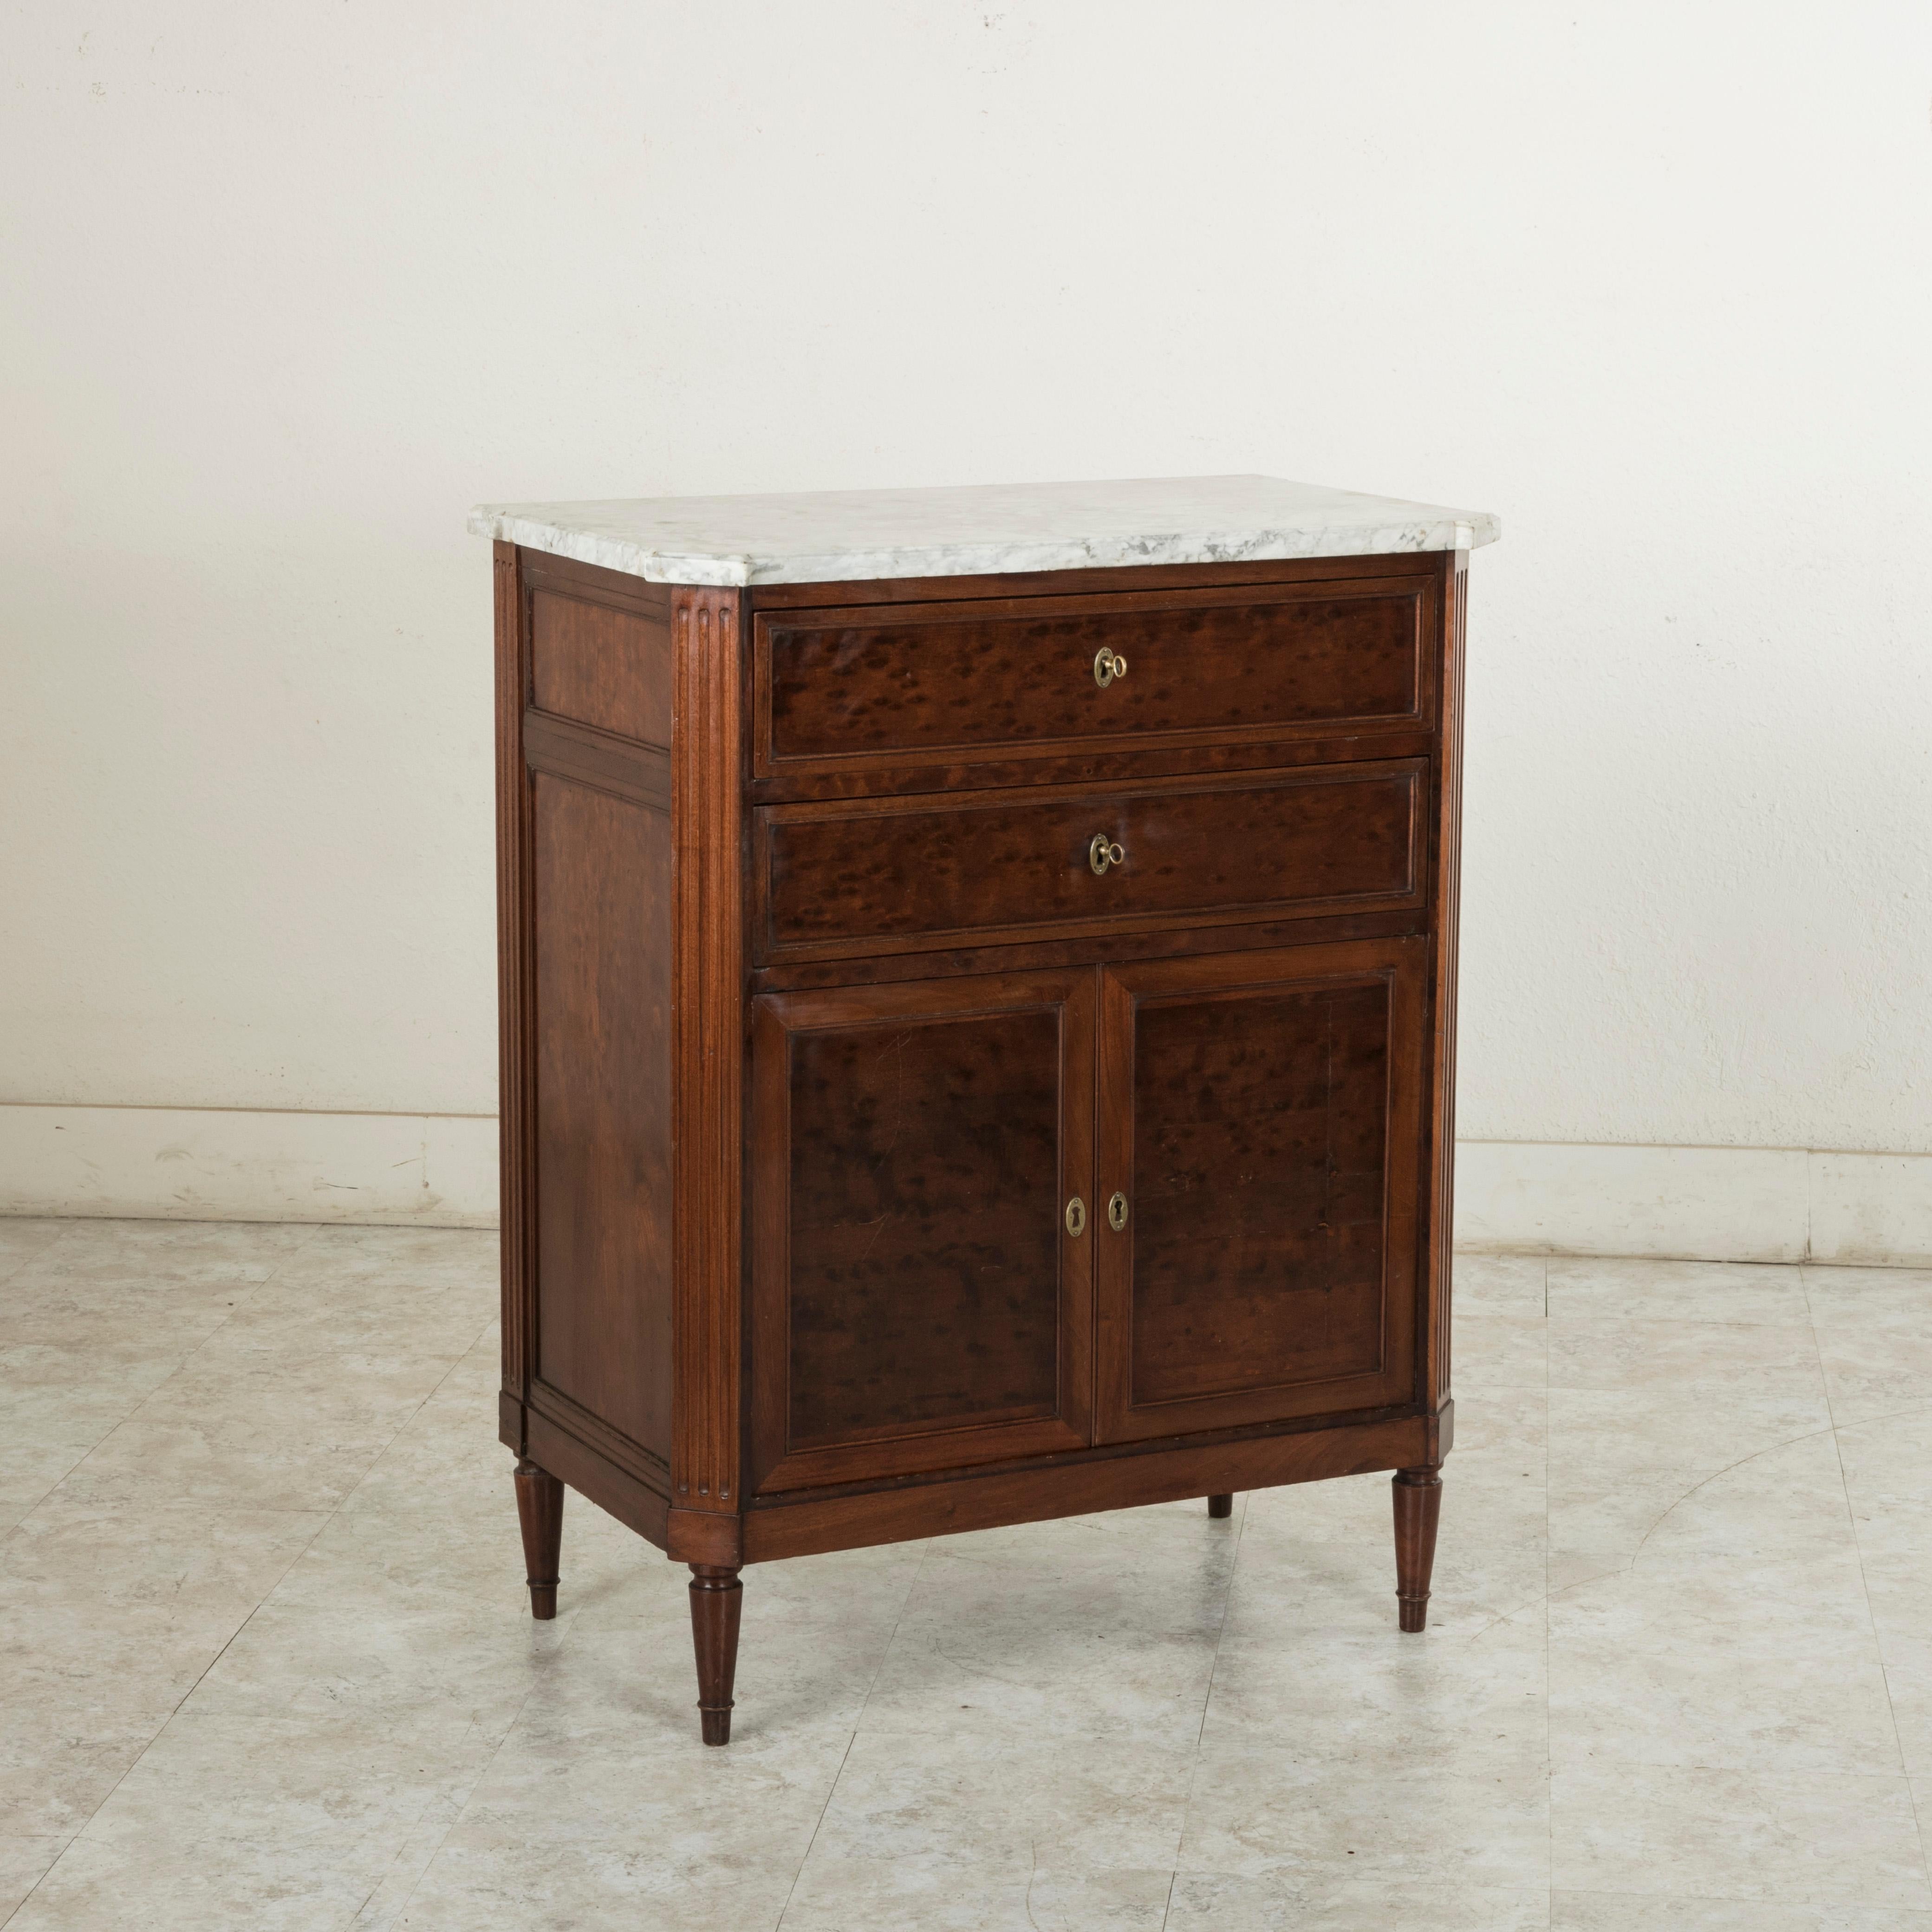 Referred to as a buffet d'appui in French due to its unusual height of 41.5 inches, this late 19th century French Louis XVI style cabinet is constructed of plum pudding mahogany and features a beveled white marble top. The corners are fluted and